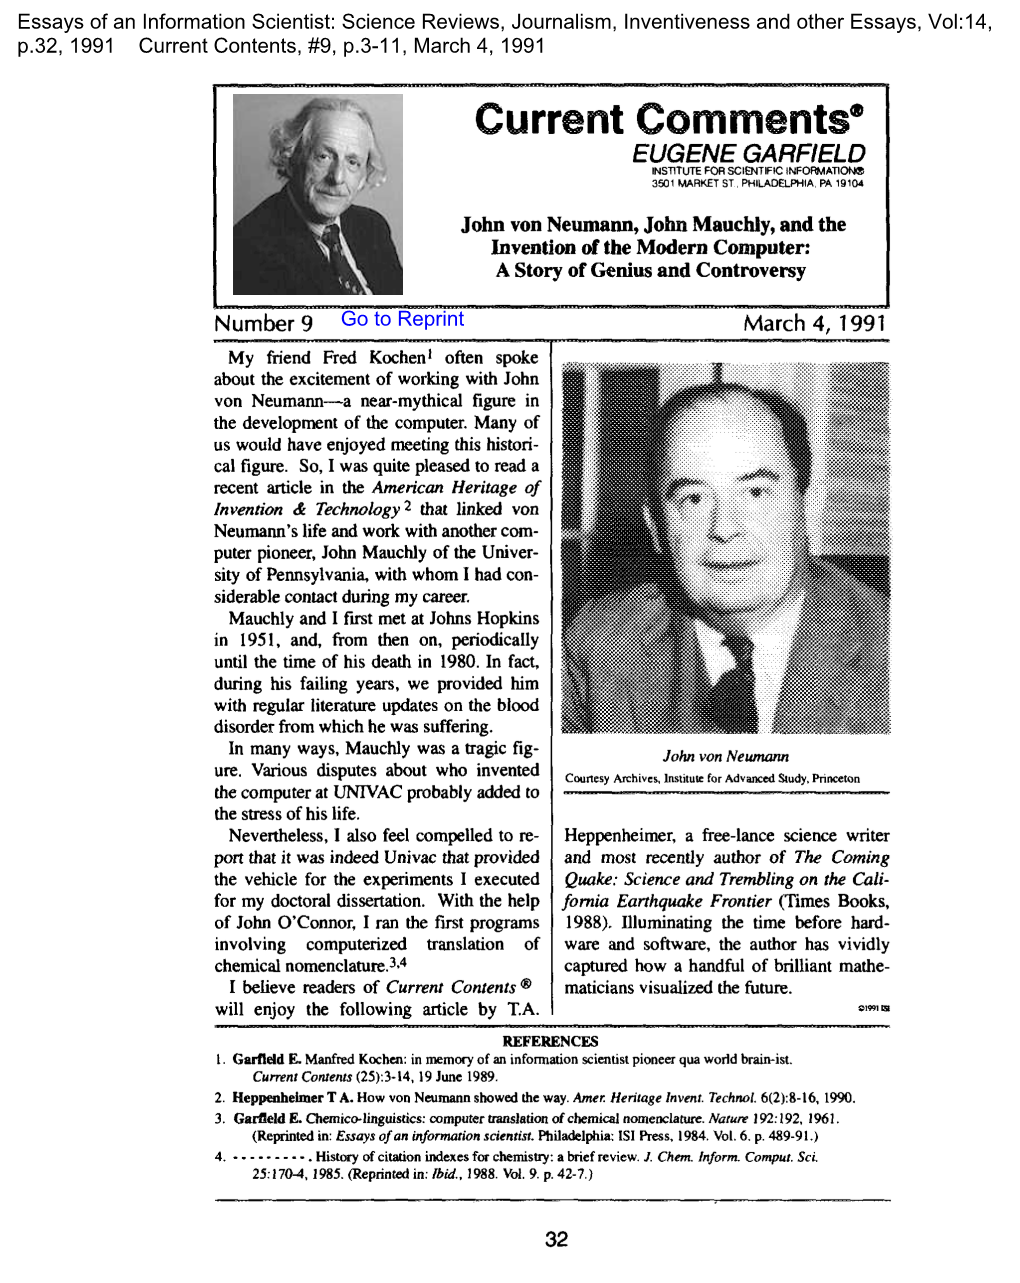 John Von Neumann, John Mauchly, and the Invention of the Modern Cosnputek a Story of Genius and Controversy